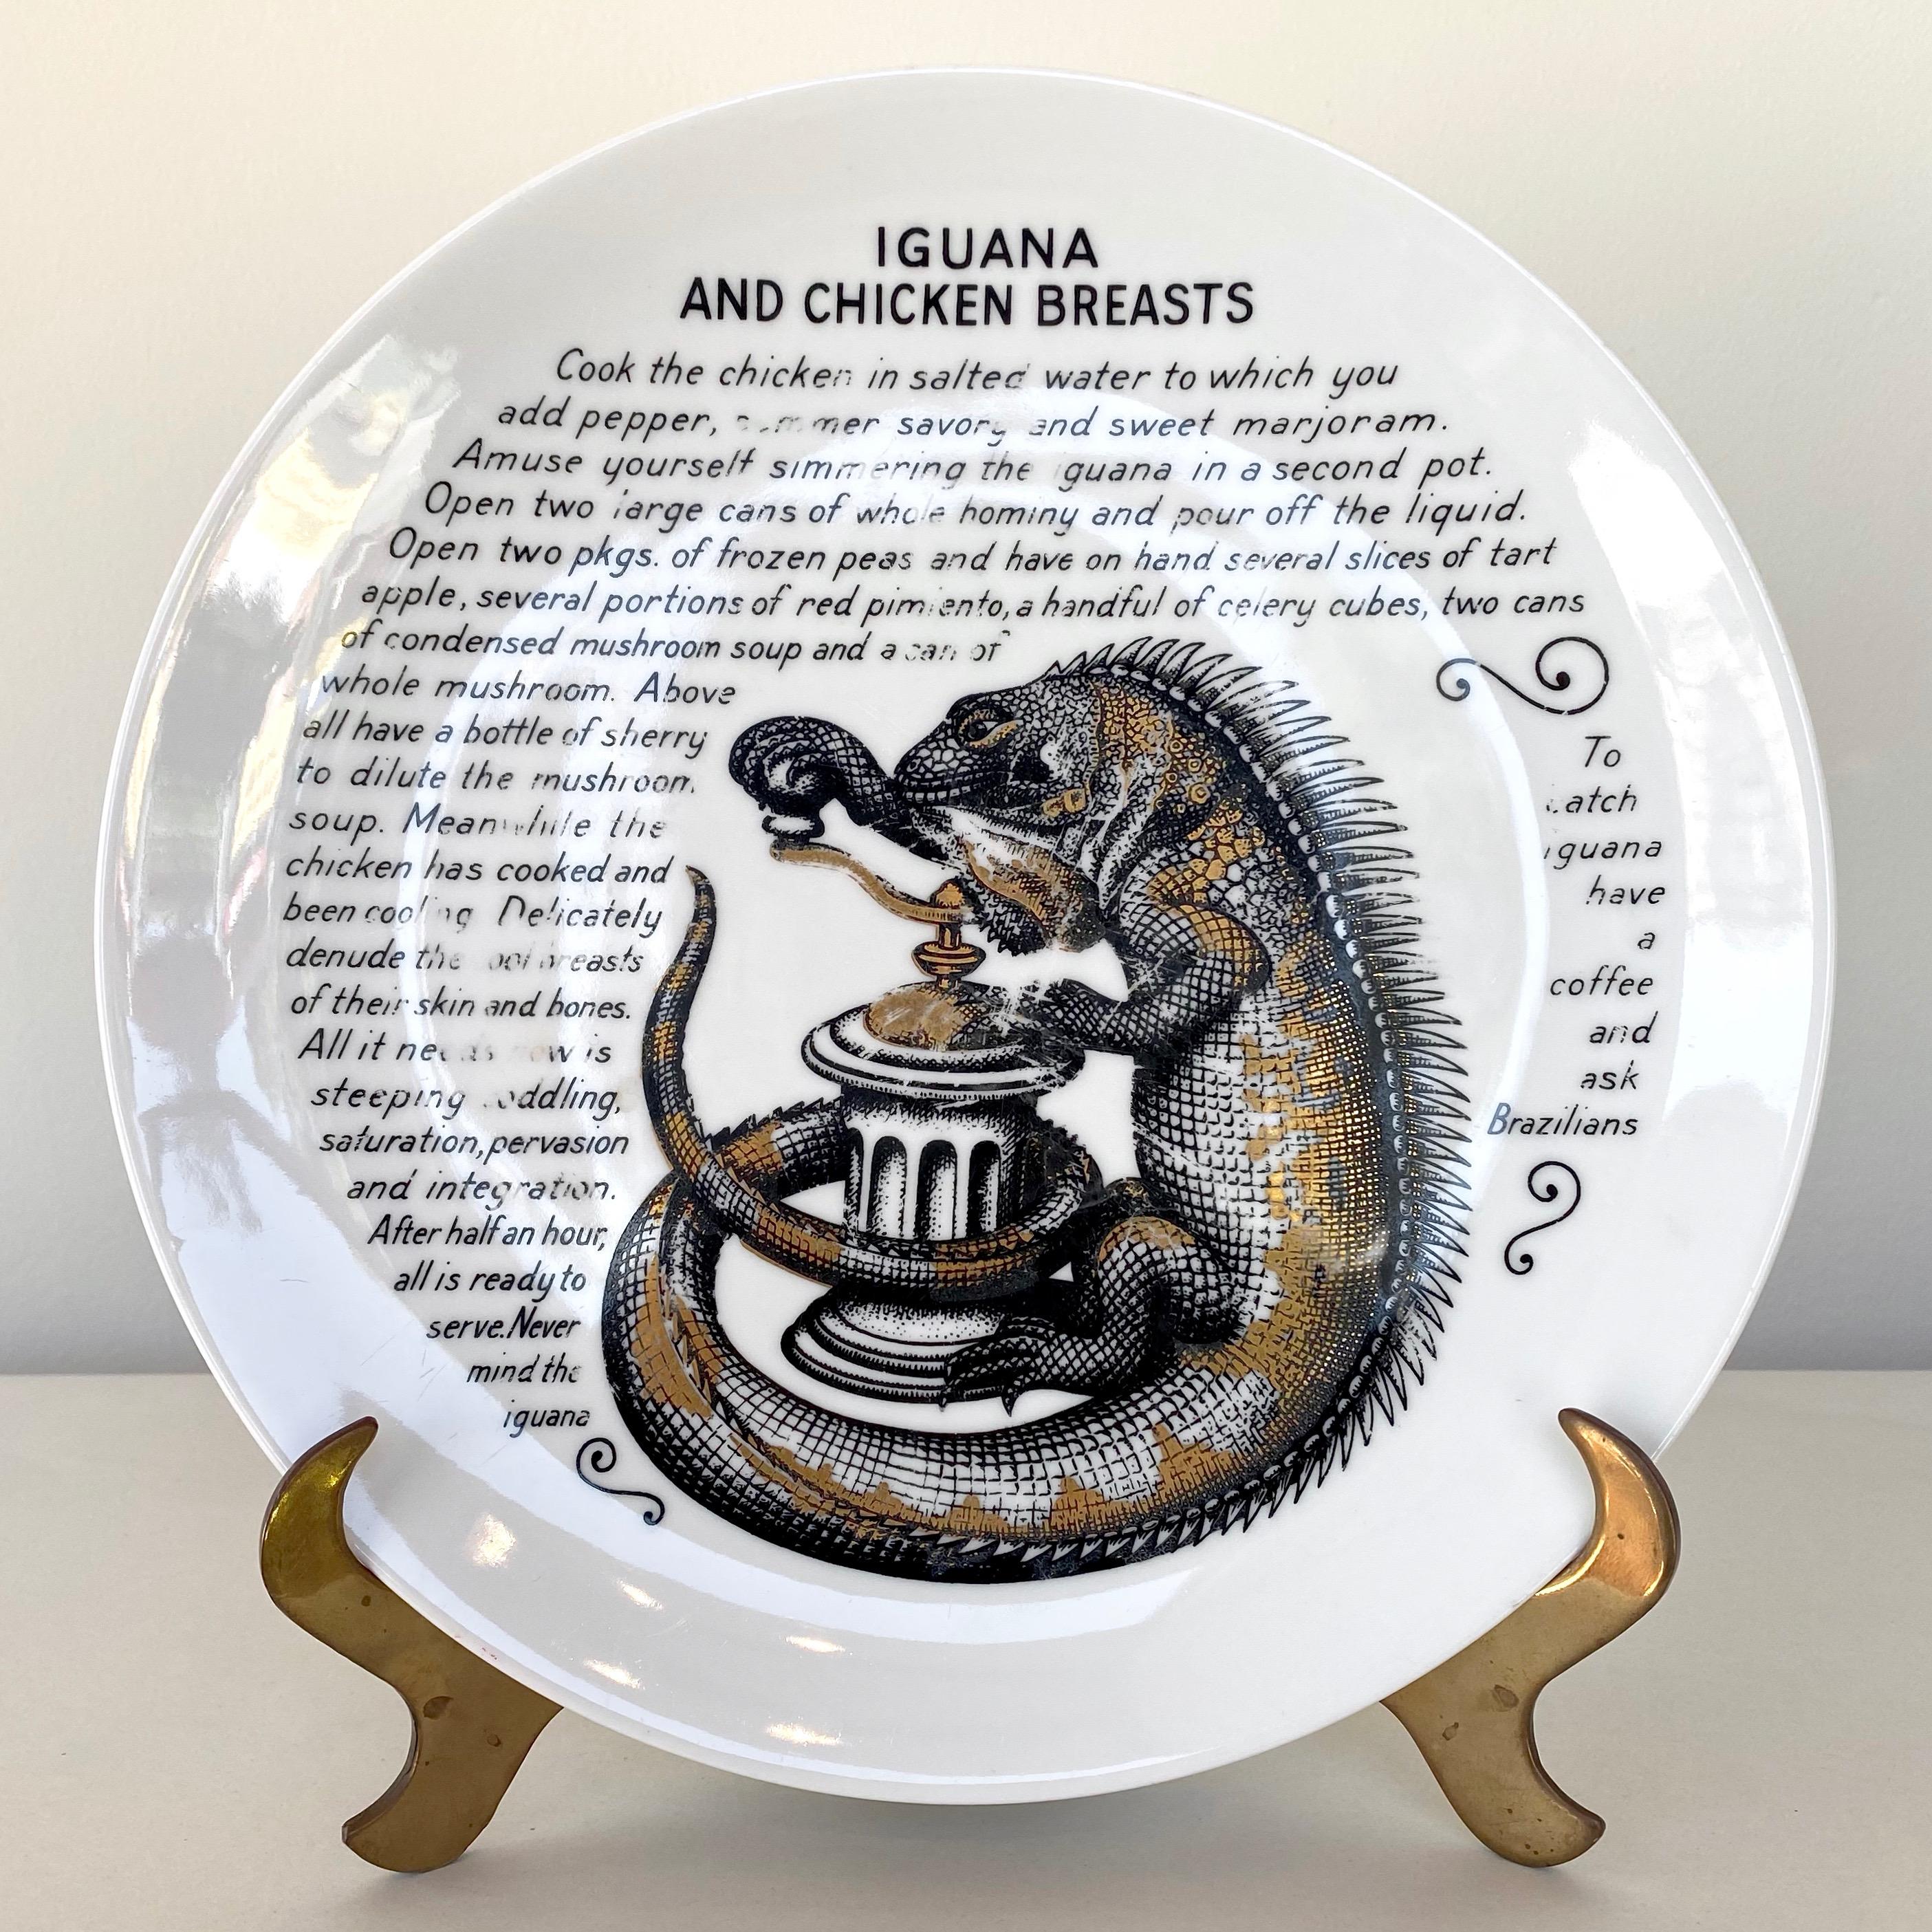 Hand-Painted Fornasetti for Fleming Joffe “Iguana and Chicken Breasts” Recipe Plate, 1960s For Sale